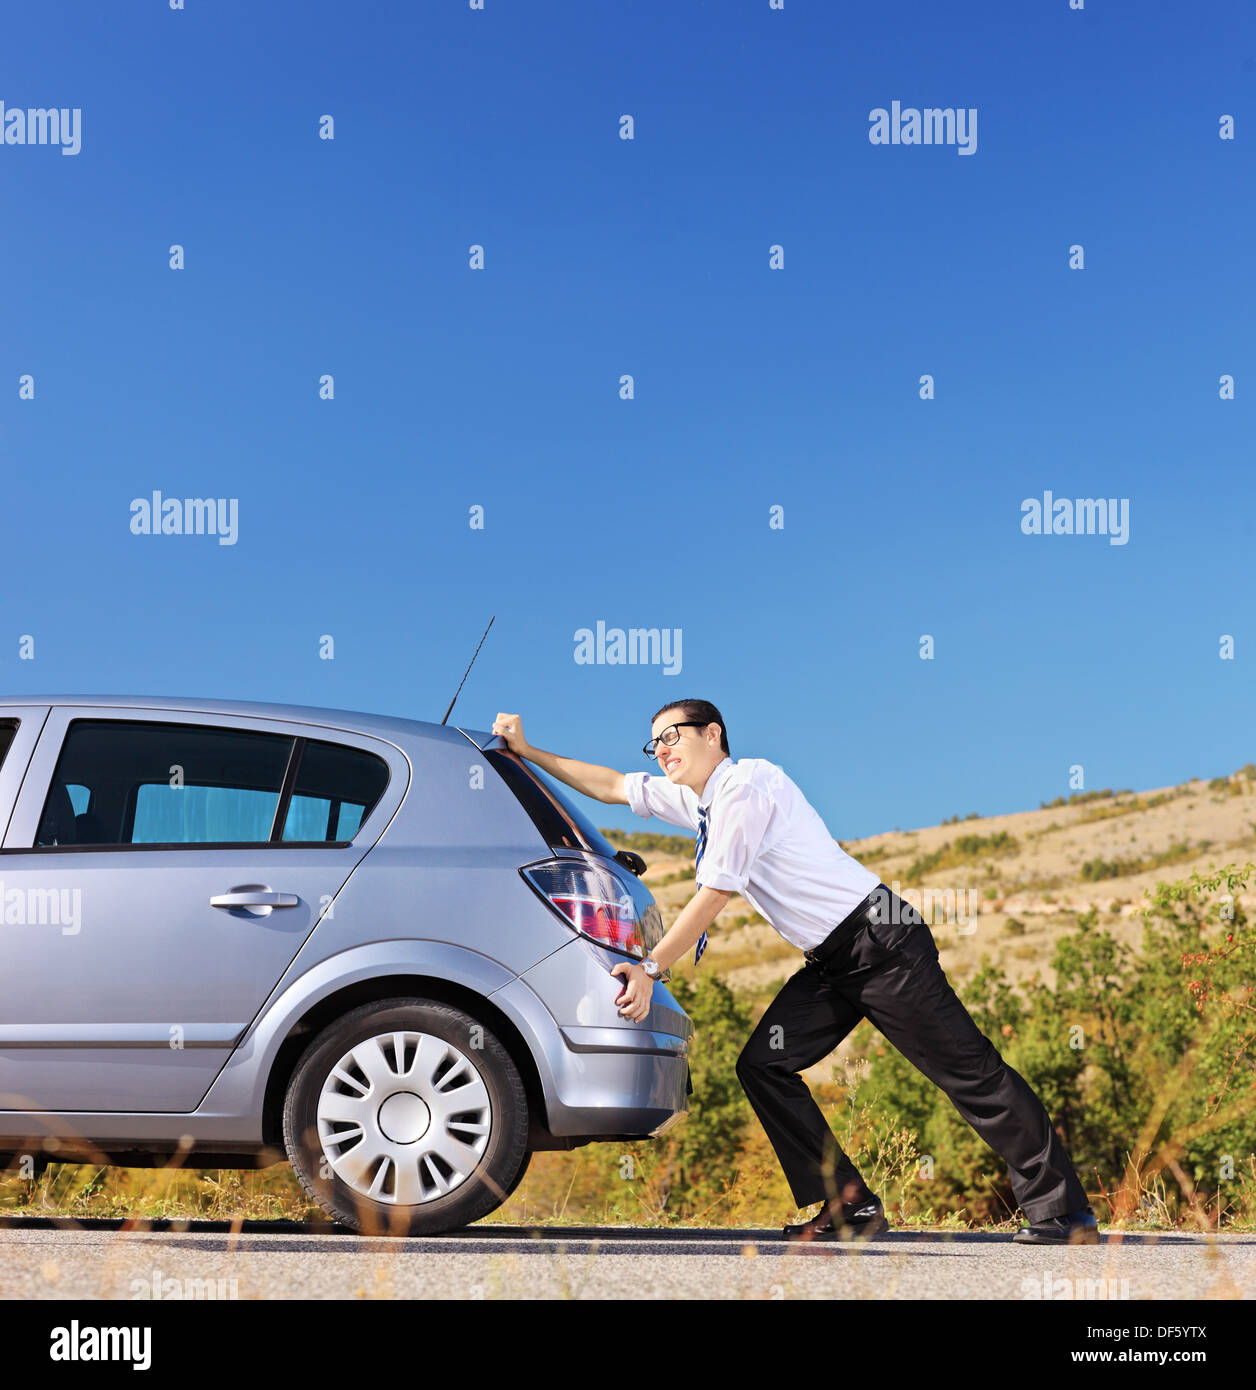 Young businessman pushing his car with empty fuel tank Stock Photo